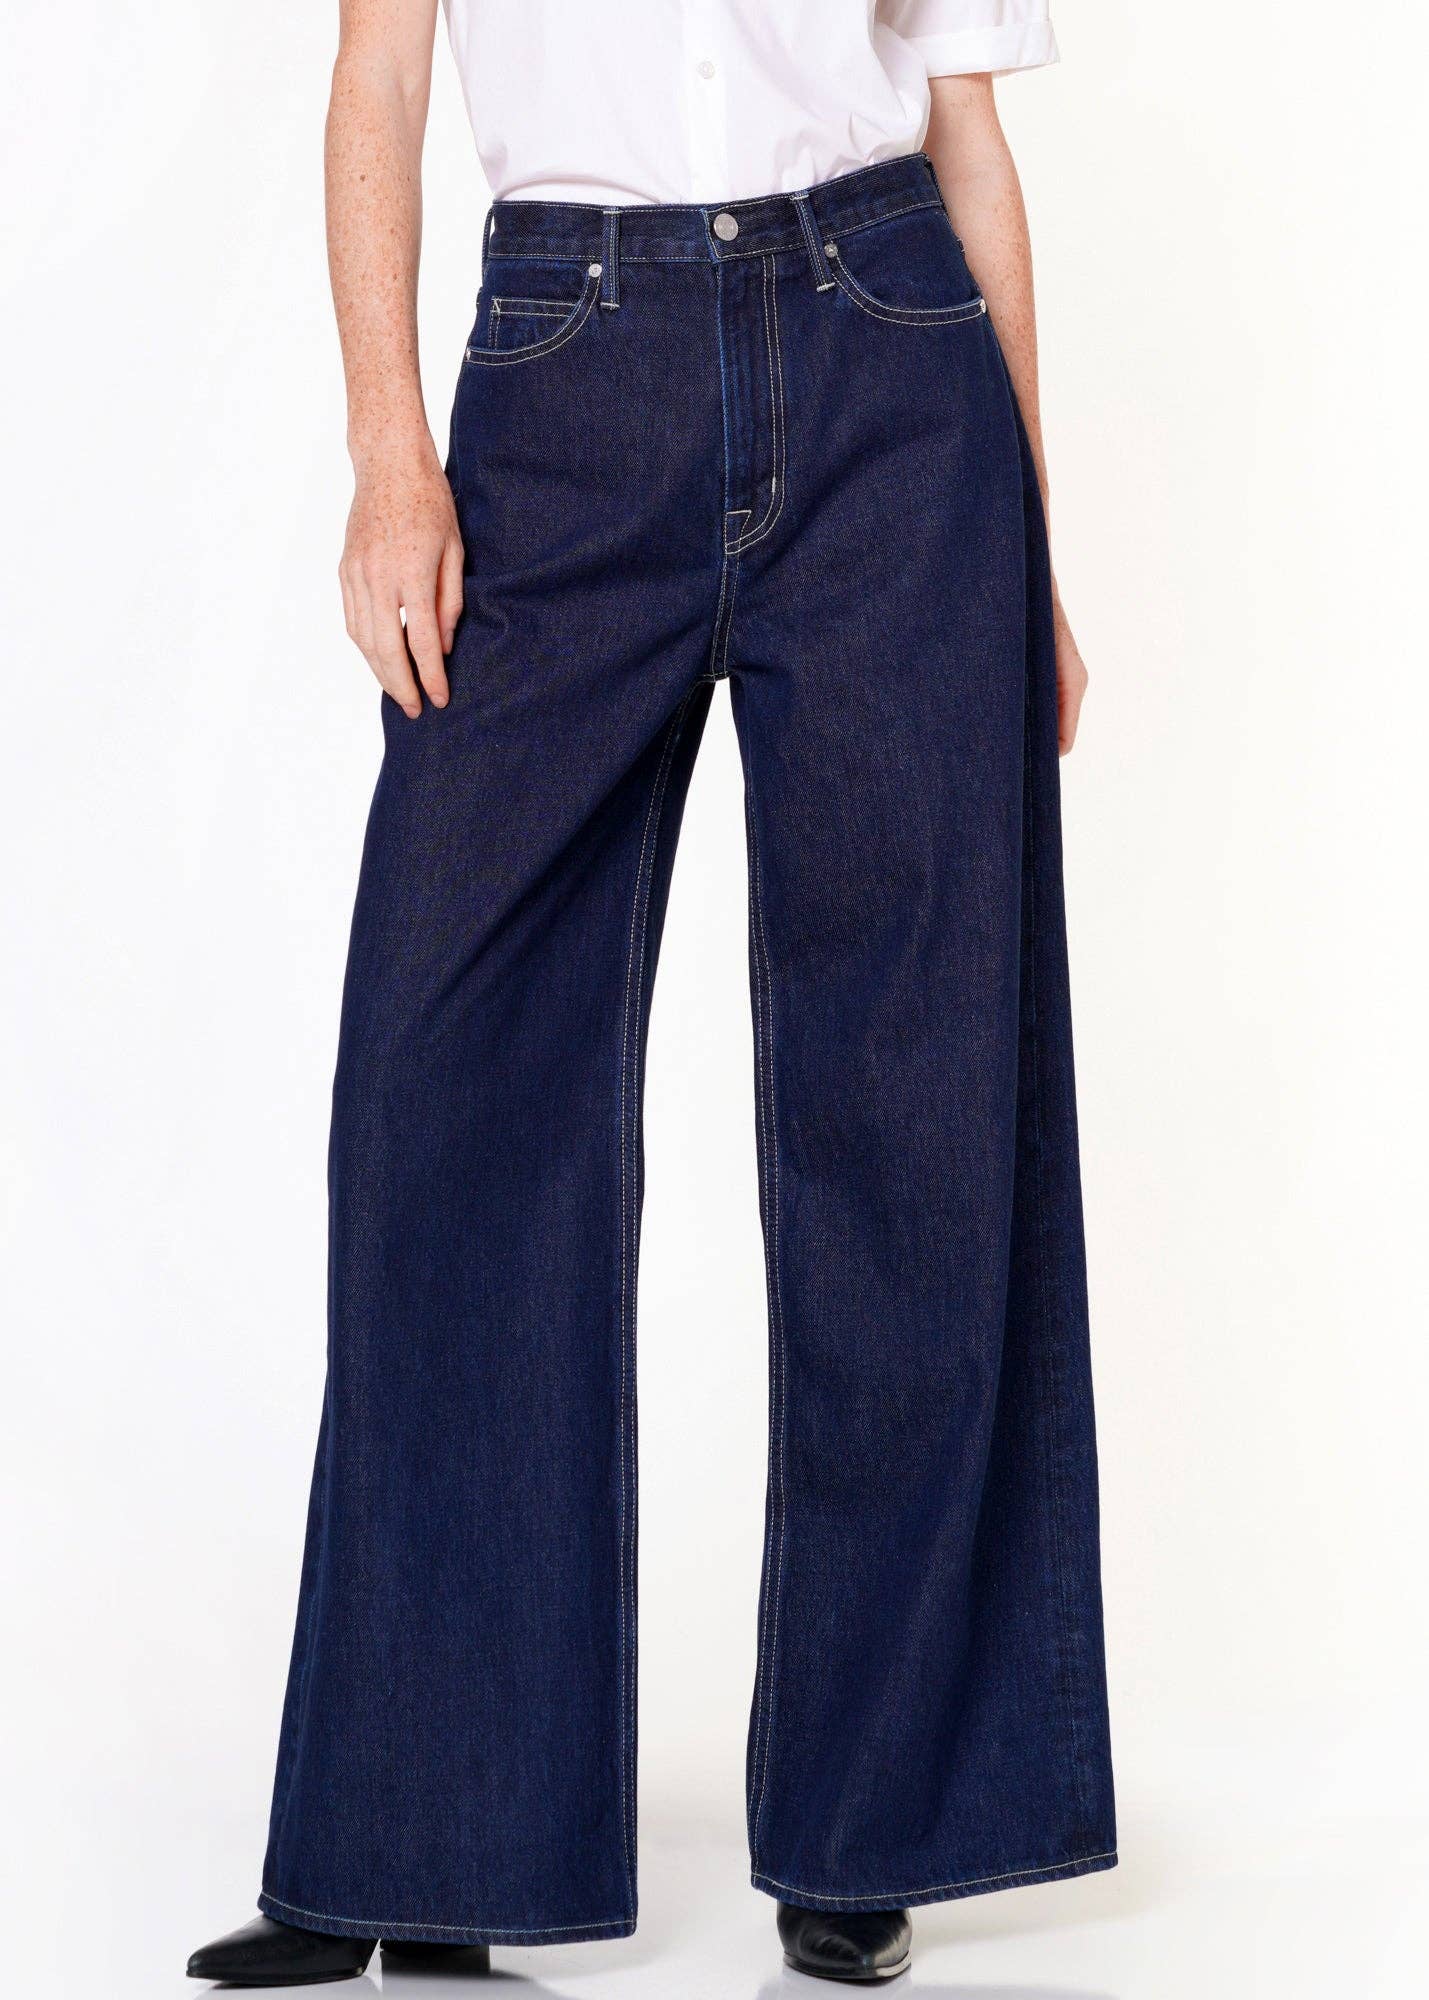 Noend Denim - Heather Baggy Jeans In Silver Lake